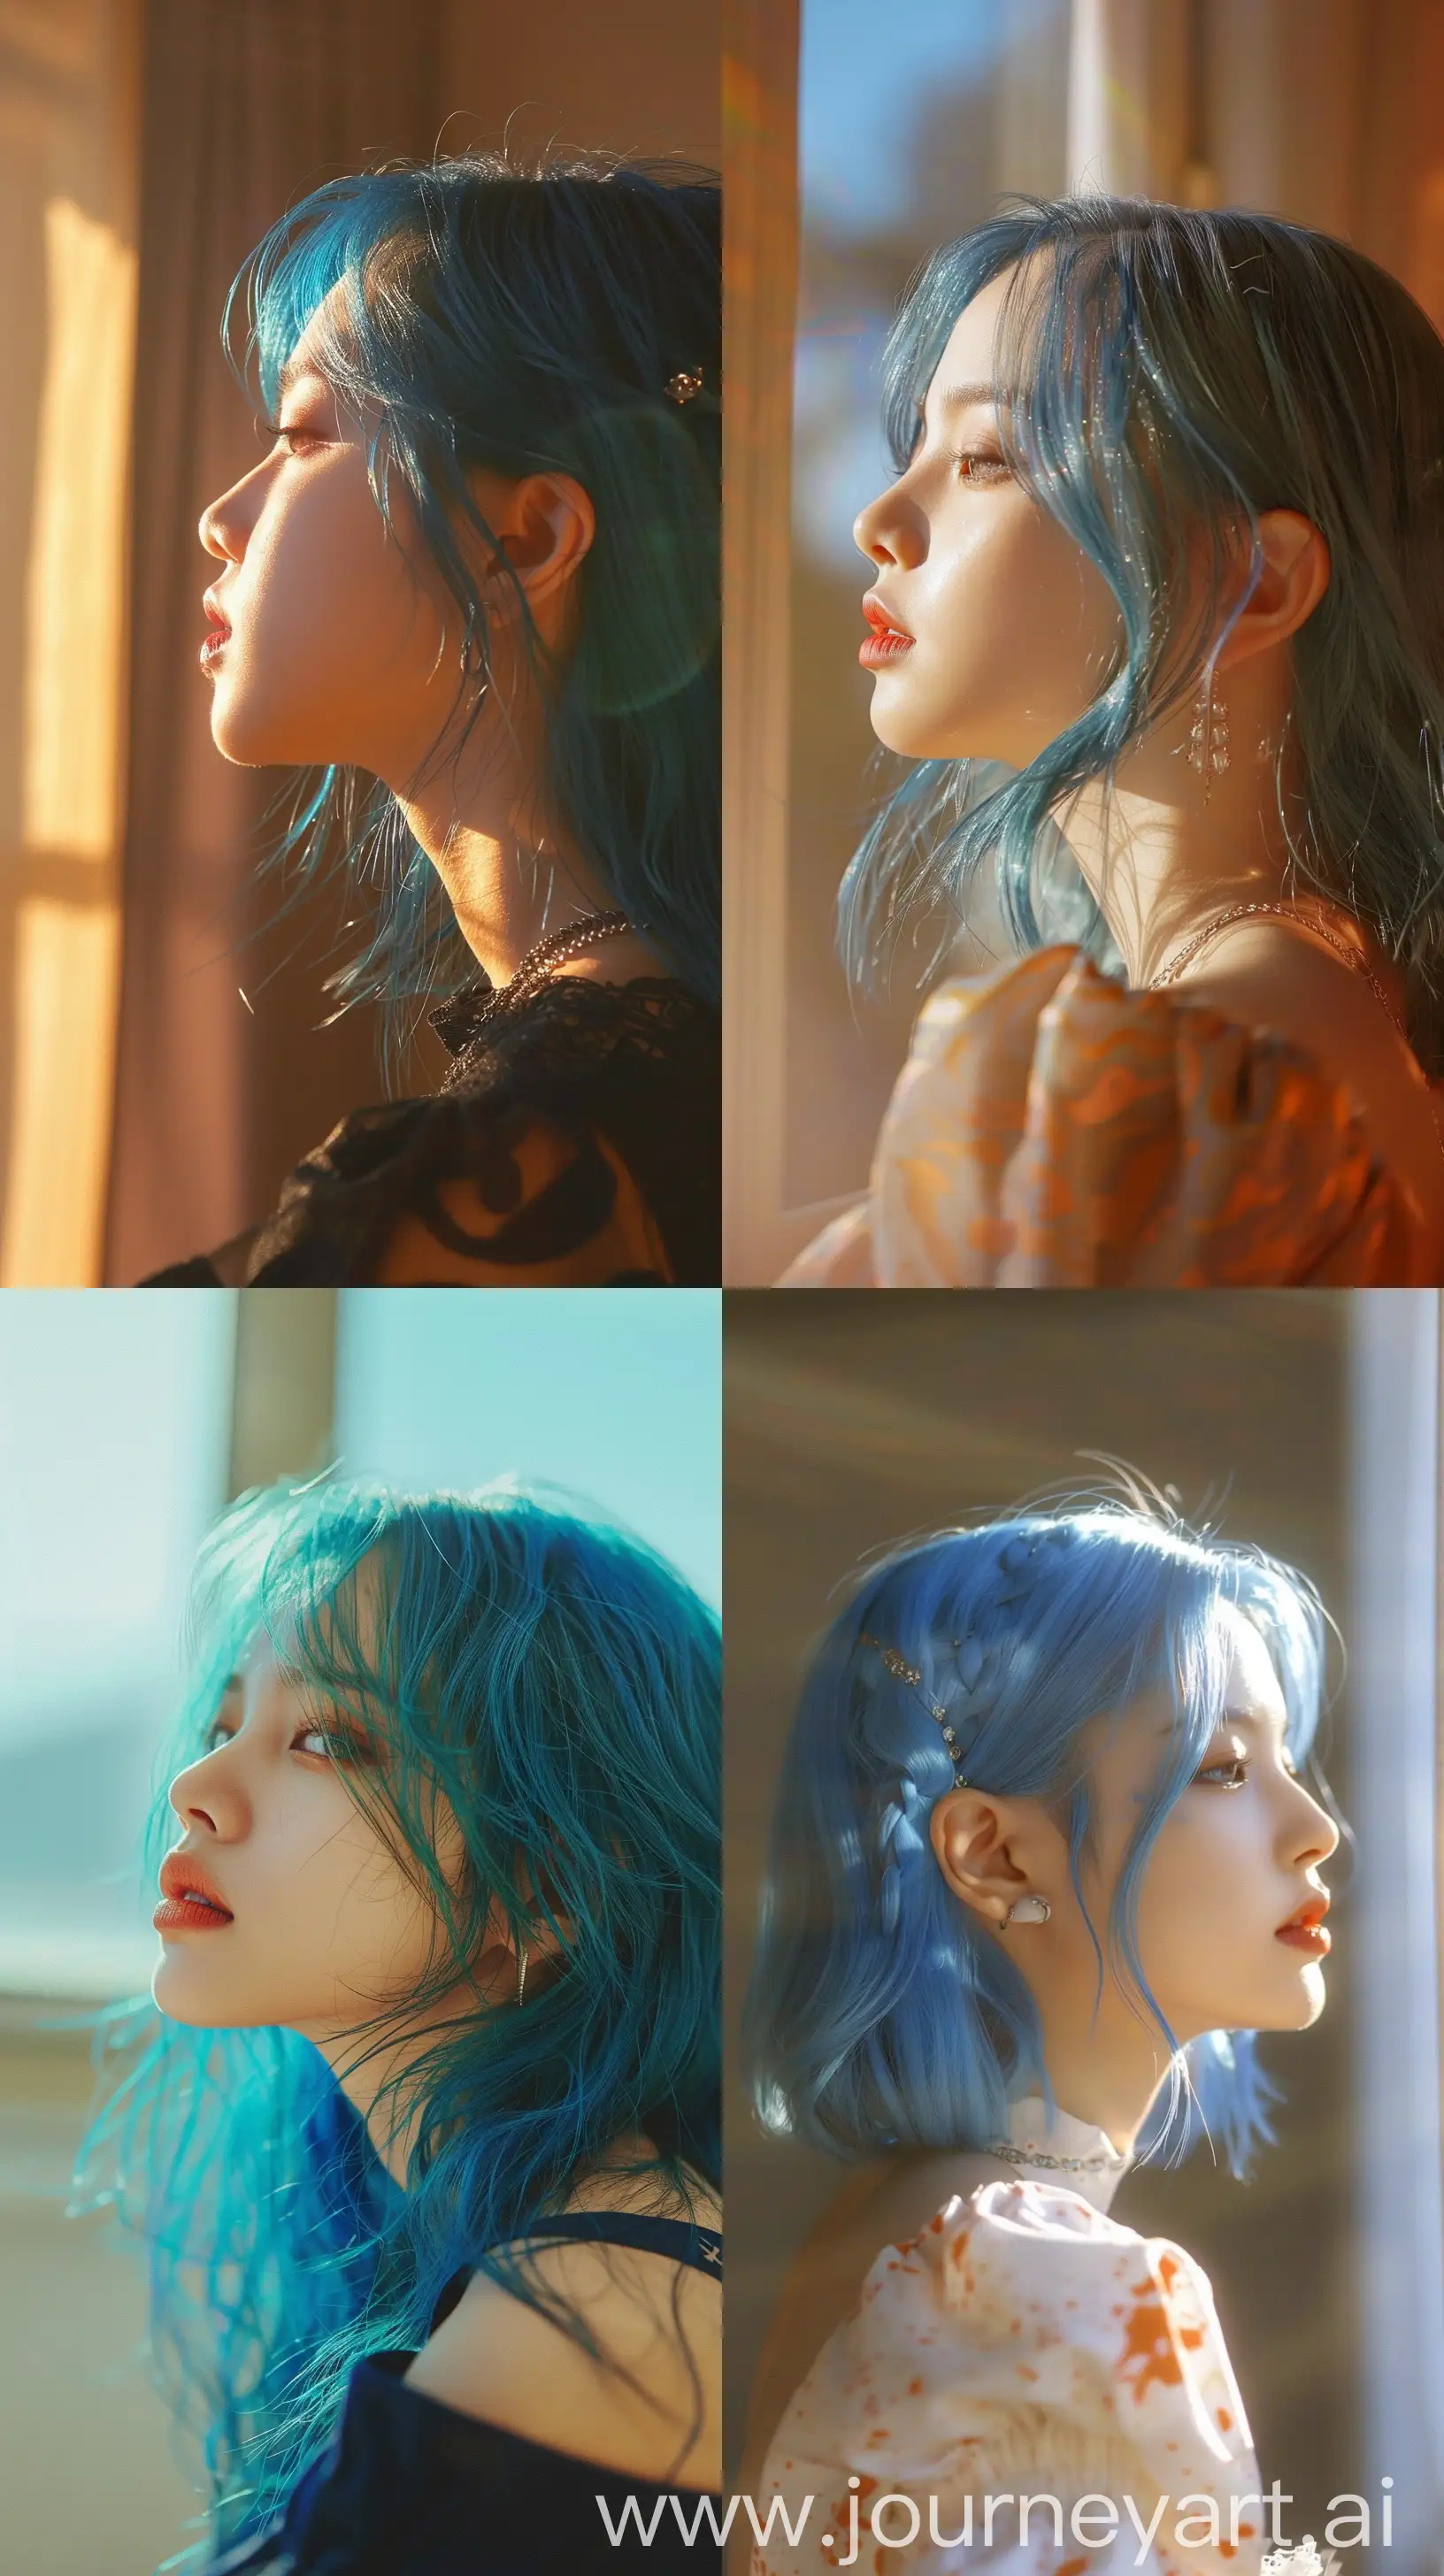 Stylish-Instagram-Profile-Picture-Blackpinks-Jennie-with-Blue-Wolfcut-Hair-and-Wide-Set-Eyes